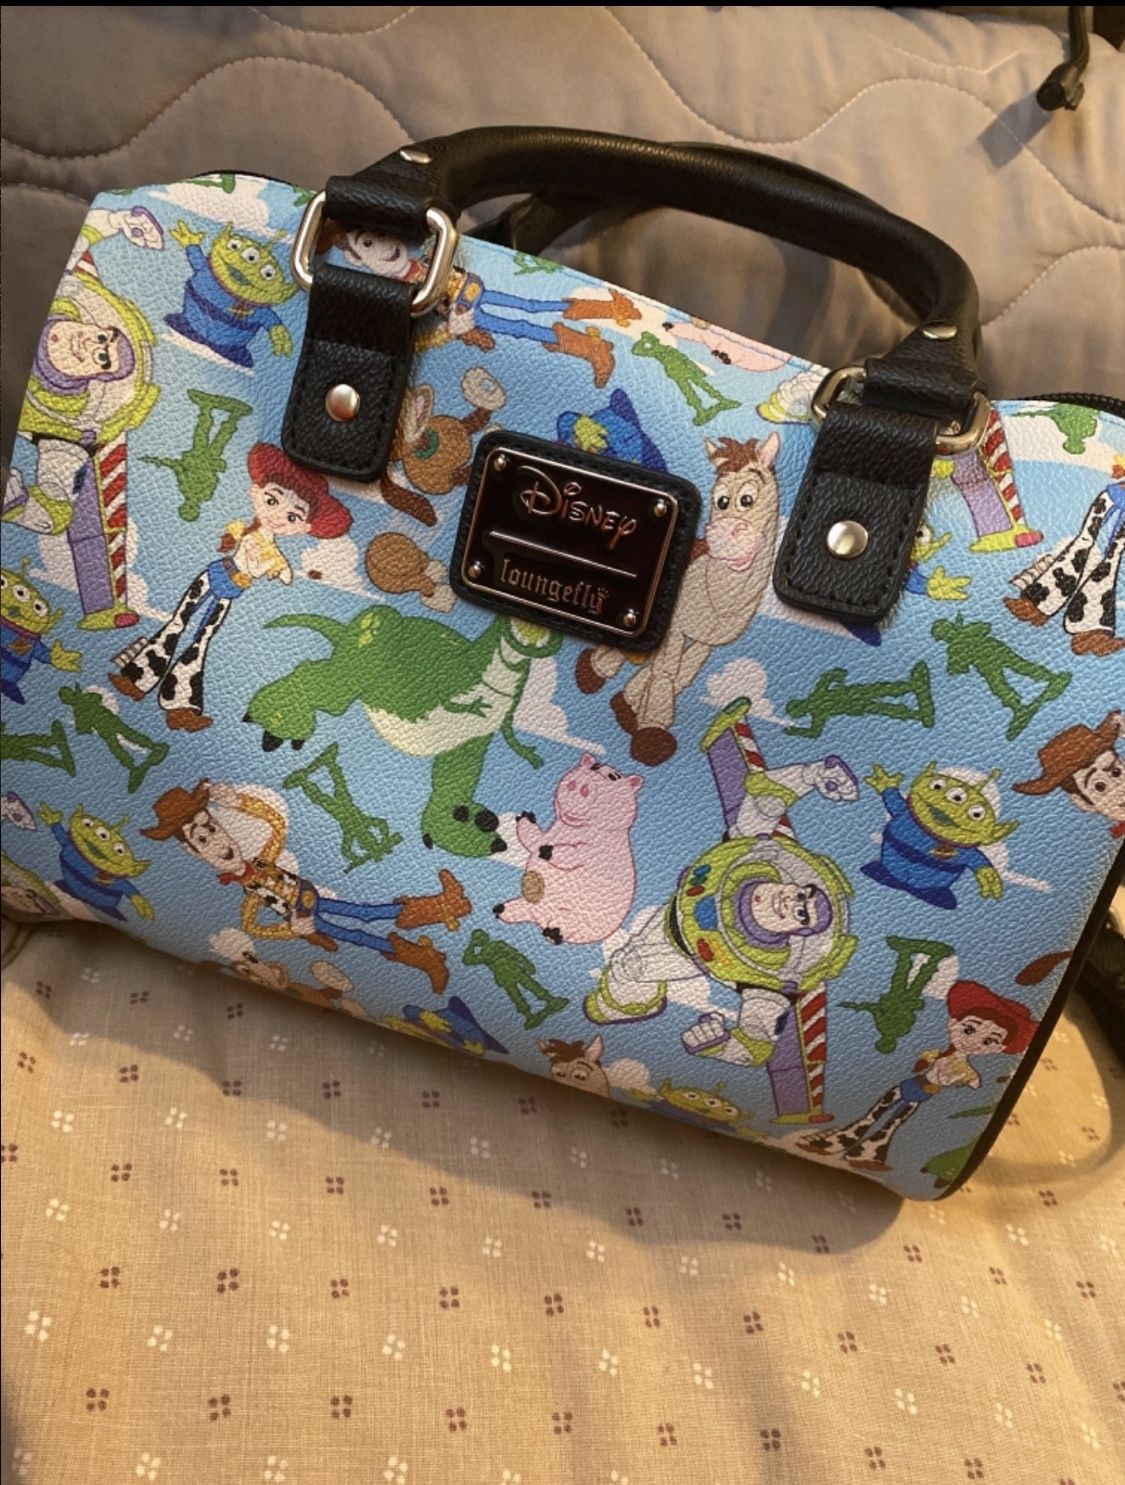 Toy Story Loungefly Purse